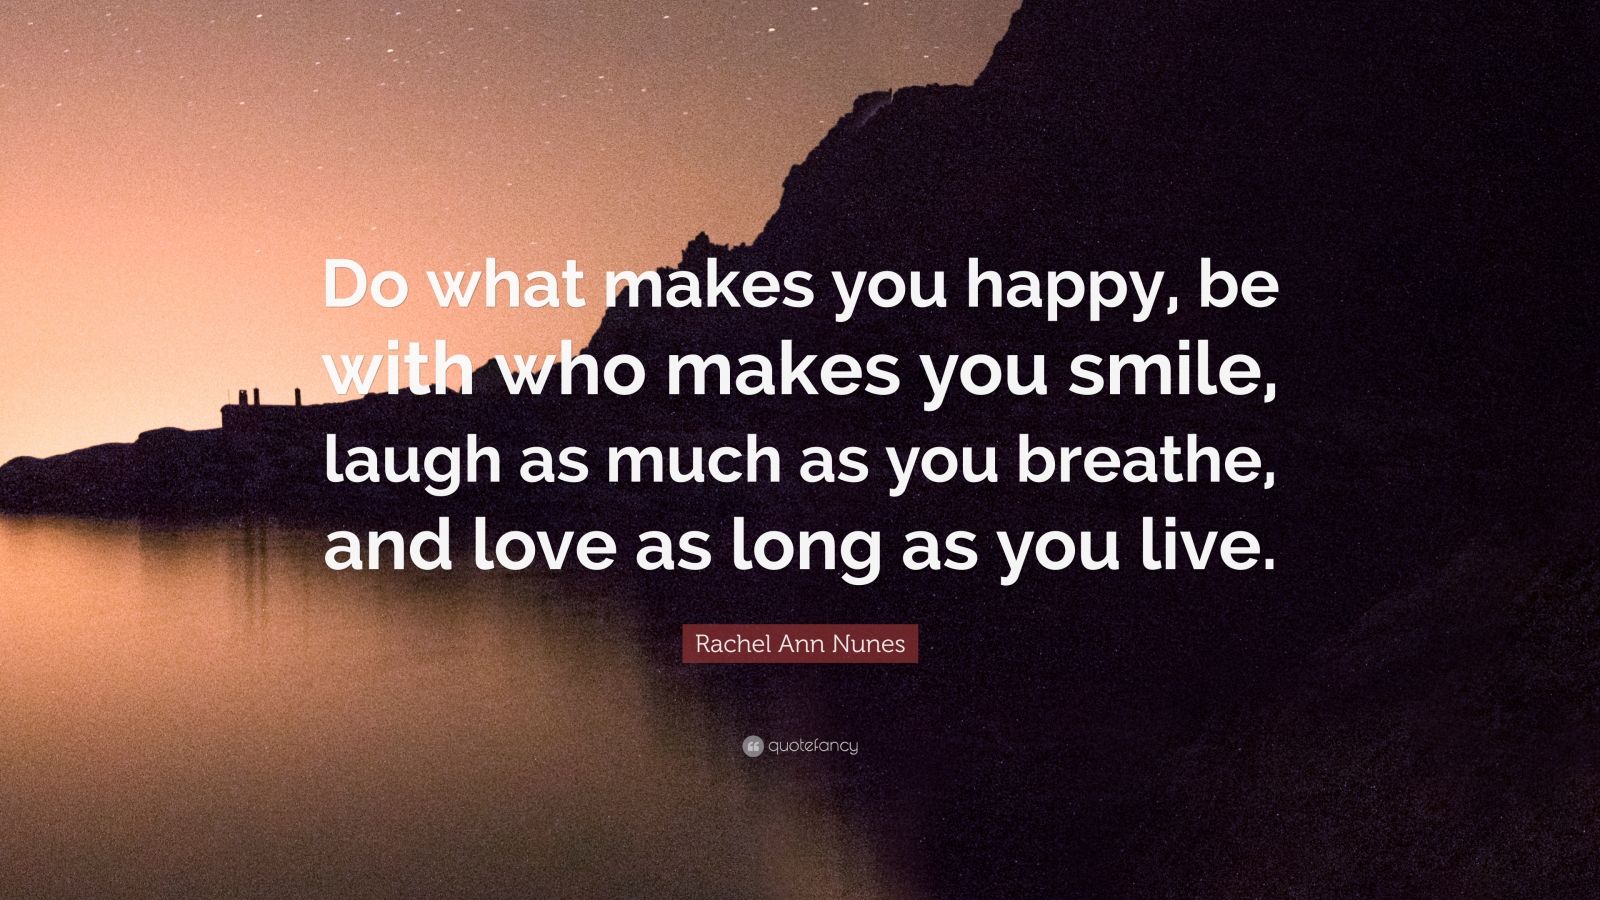 Rachel Ann Nunes Quote: “Do what makes you happy, be with who makes you ...